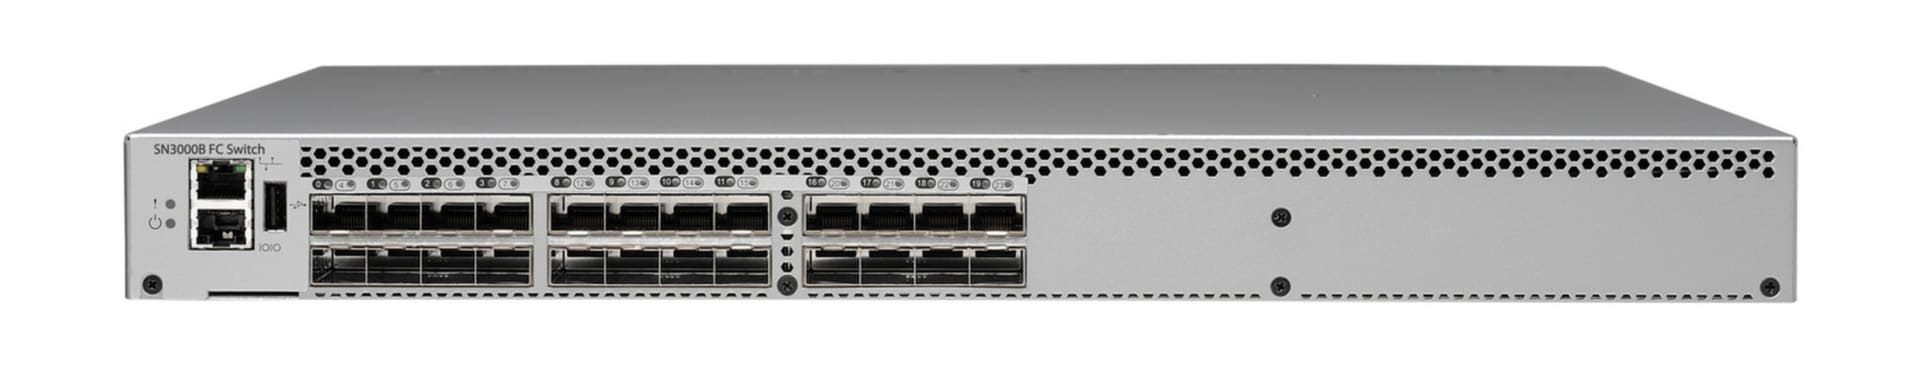 HPE SN3000B 16Gbps 24-port/24-port Active Fibre Channel Switch